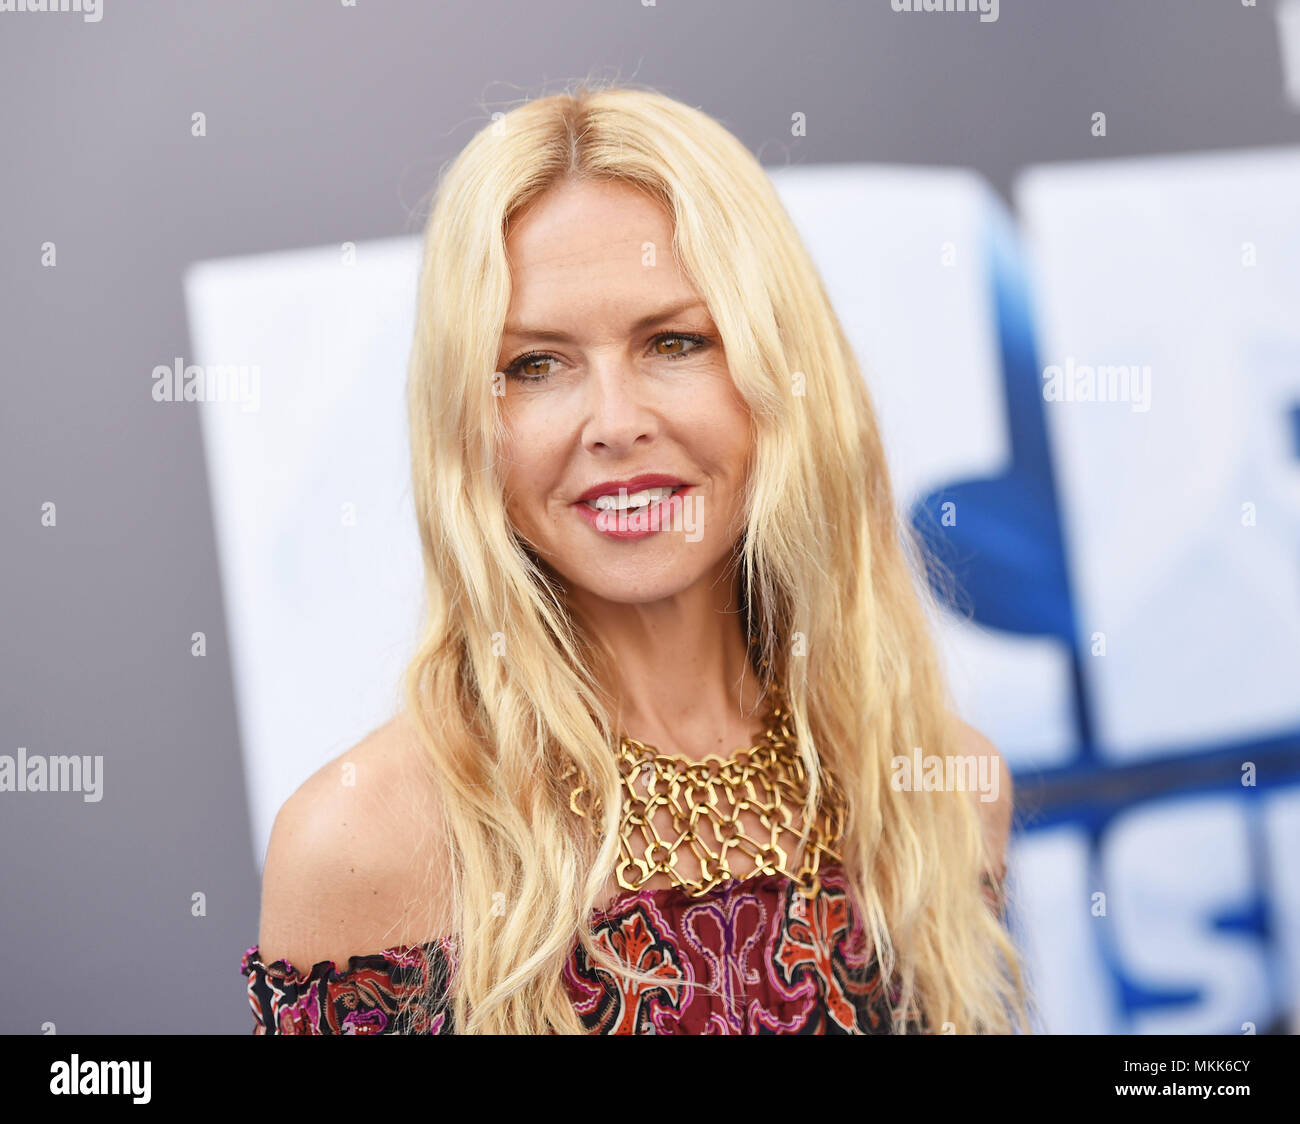 Fashion Designer Rachel Zoe arrives for the Ice Age: Collision News  Photo - Getty Images